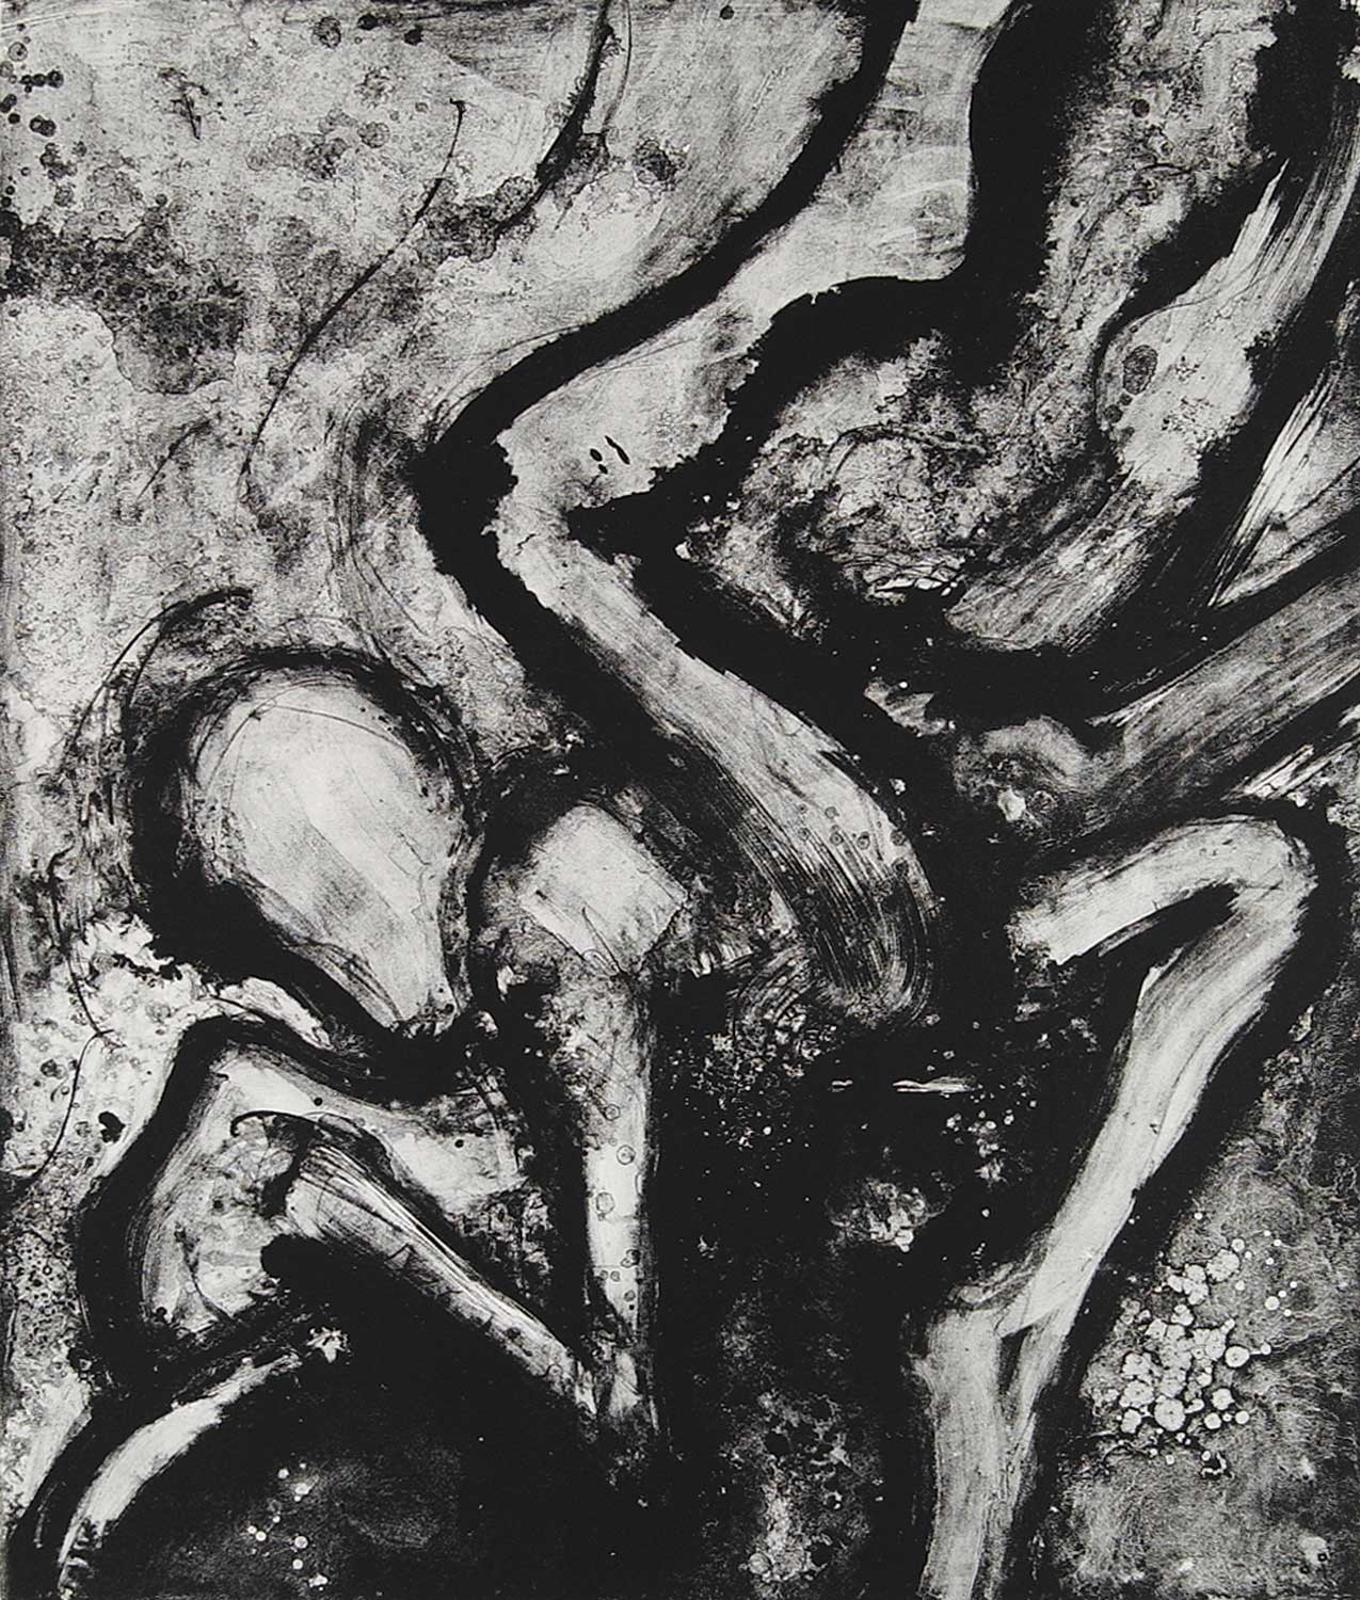 John Graham Coughtry (1931-1999) - Untitled - Black and White Abstraction II #26/28